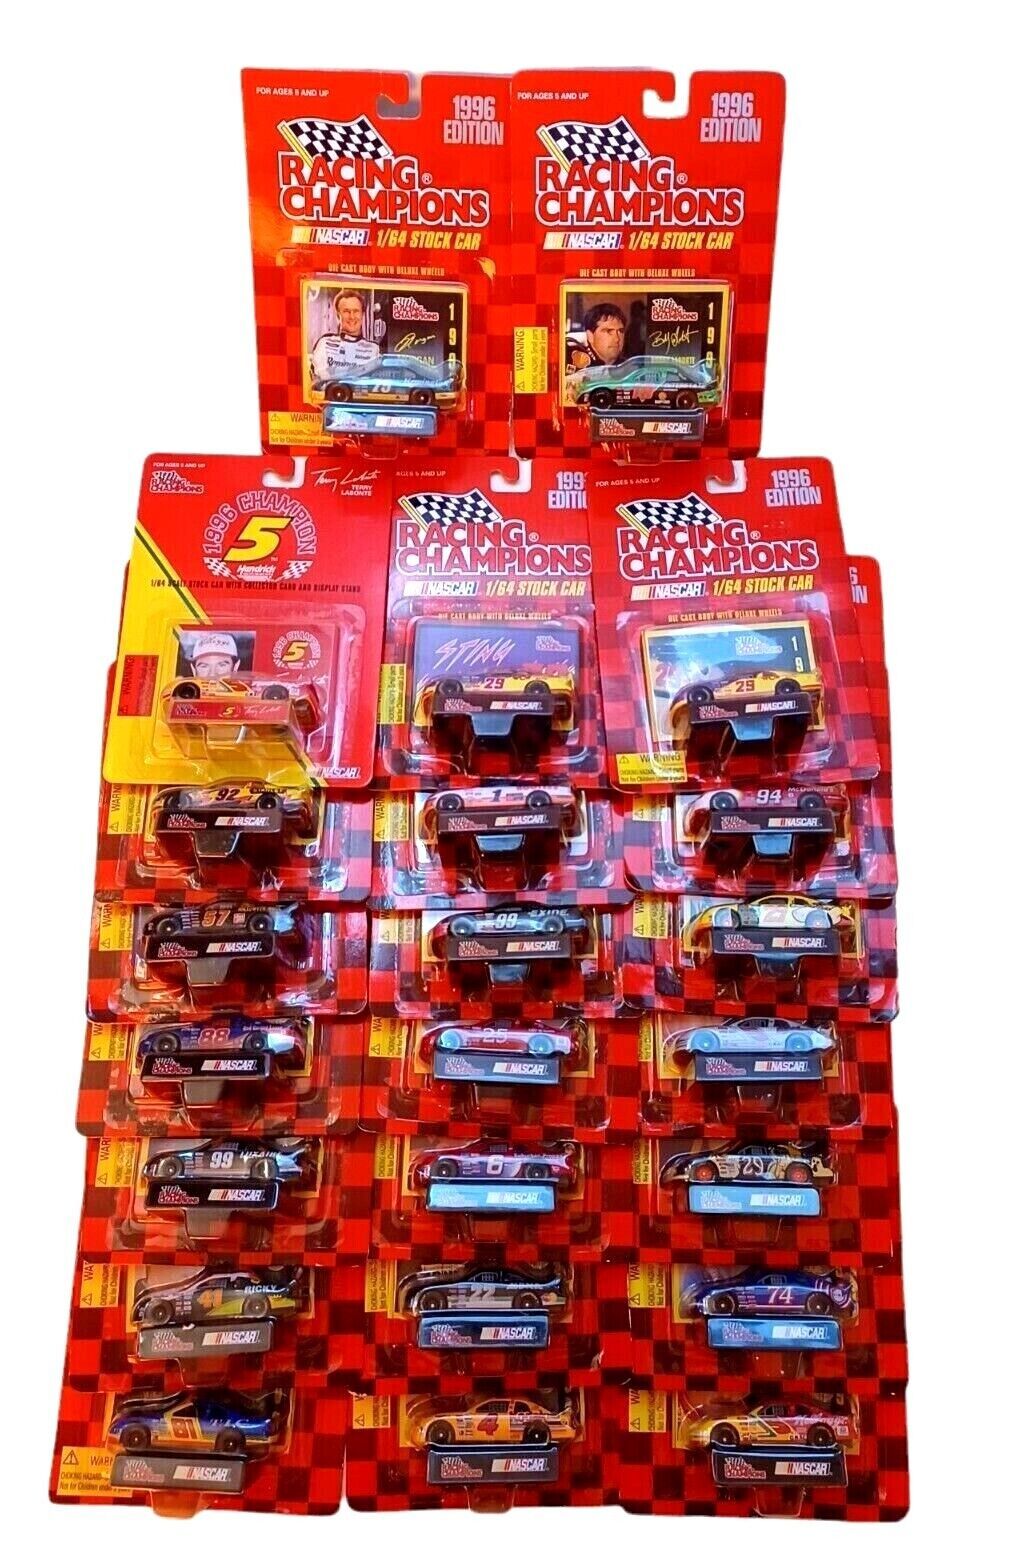 Lot of 23 Racing Champion 1996 Edition NASCAR Stock Cars NIP New Sealed on Card - $39.55